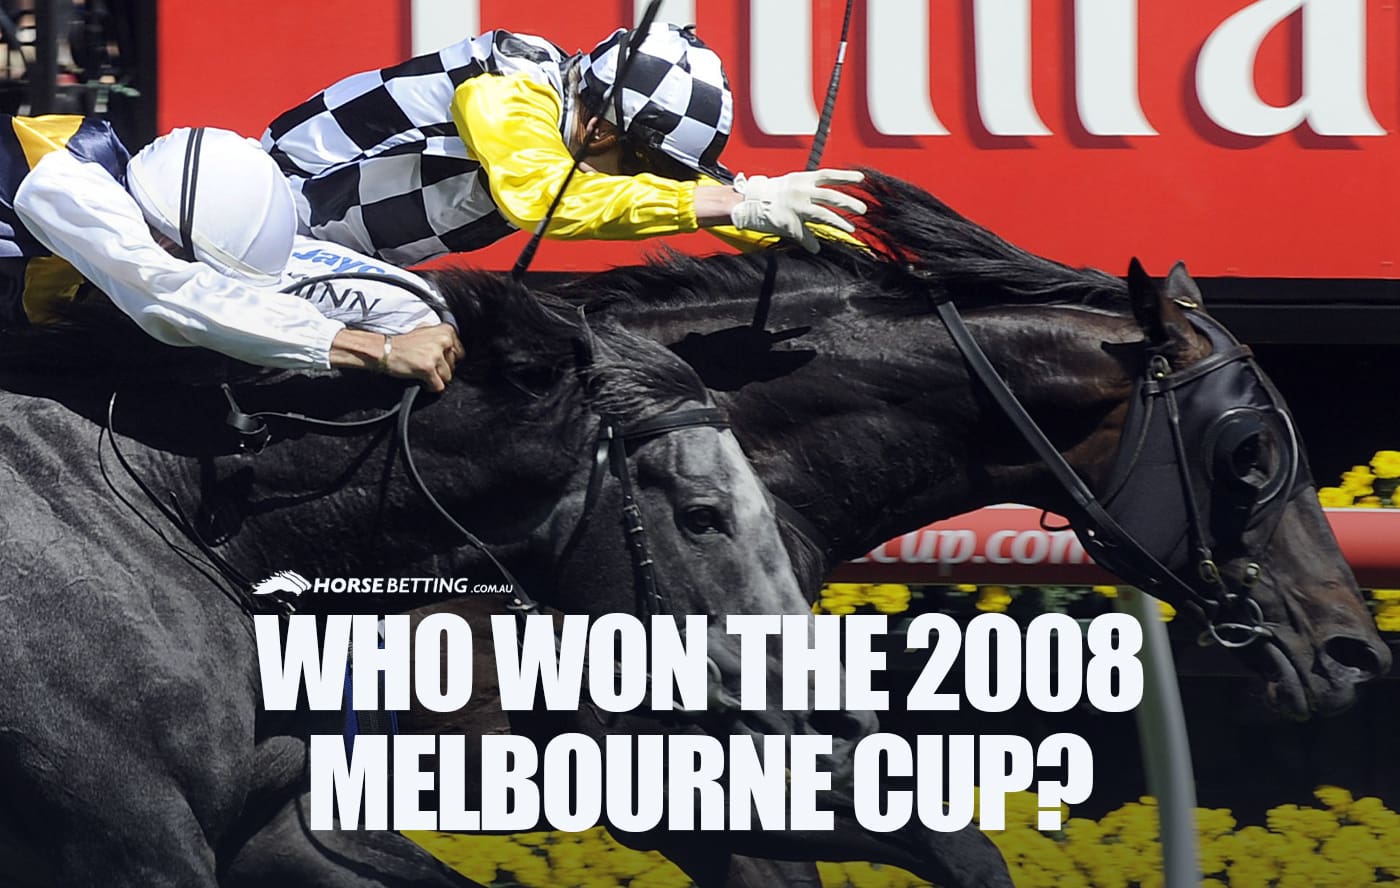 Who won the 2008 Melbourne Cup?